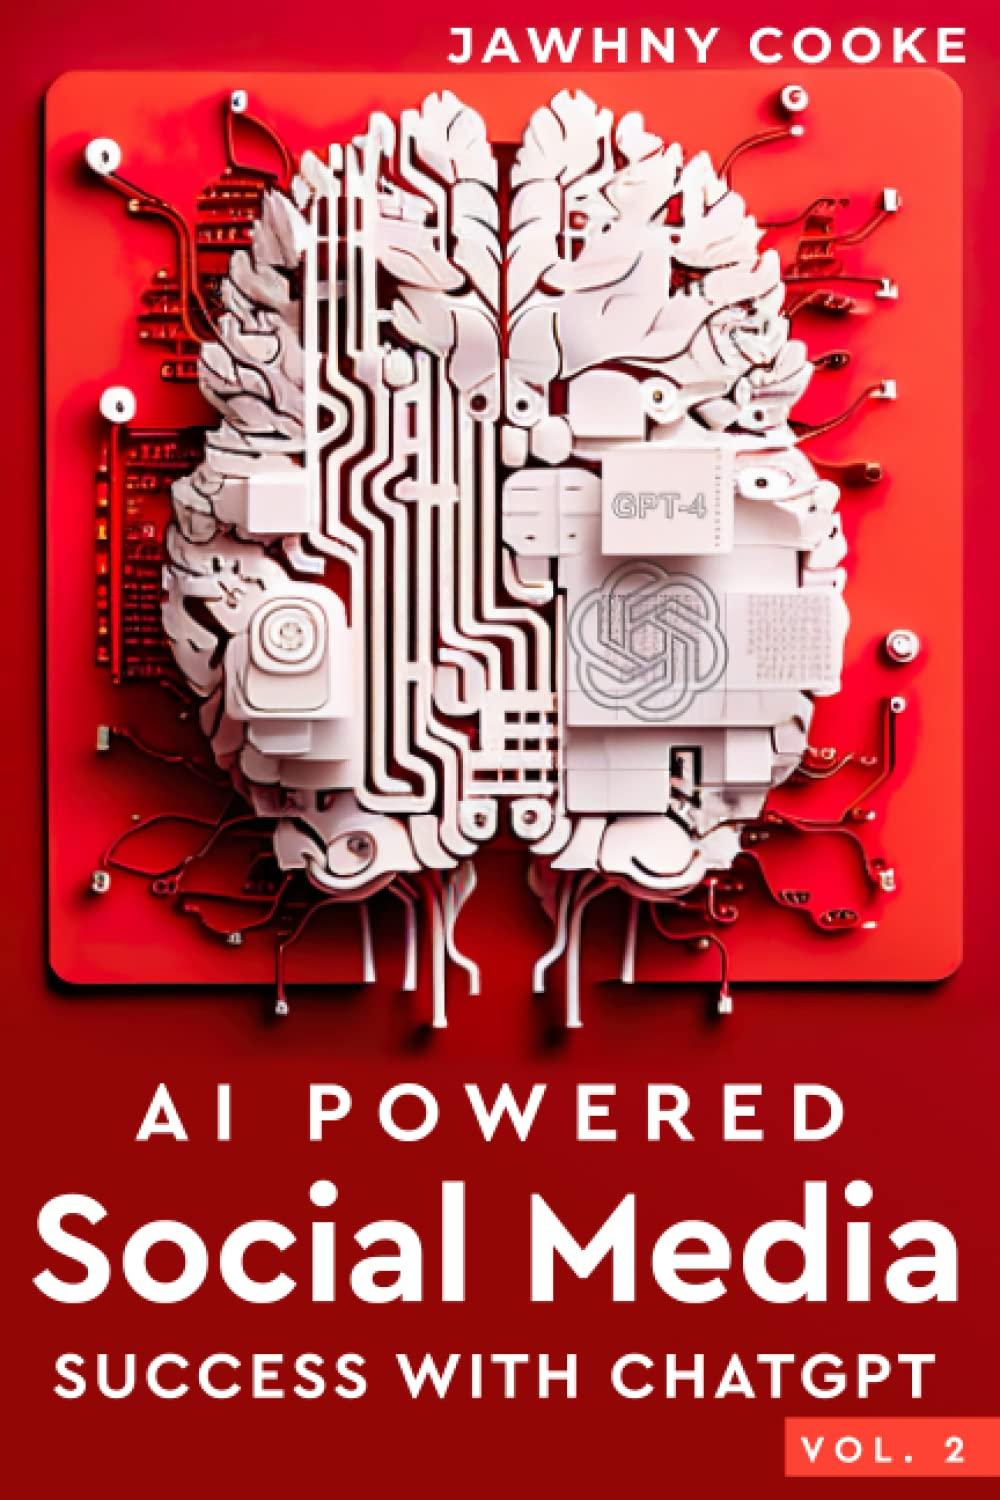 ai powered social media success with chatgpt volume 2 1st edition jawhny cooke b0c2rtz3y3, 979-8218196424